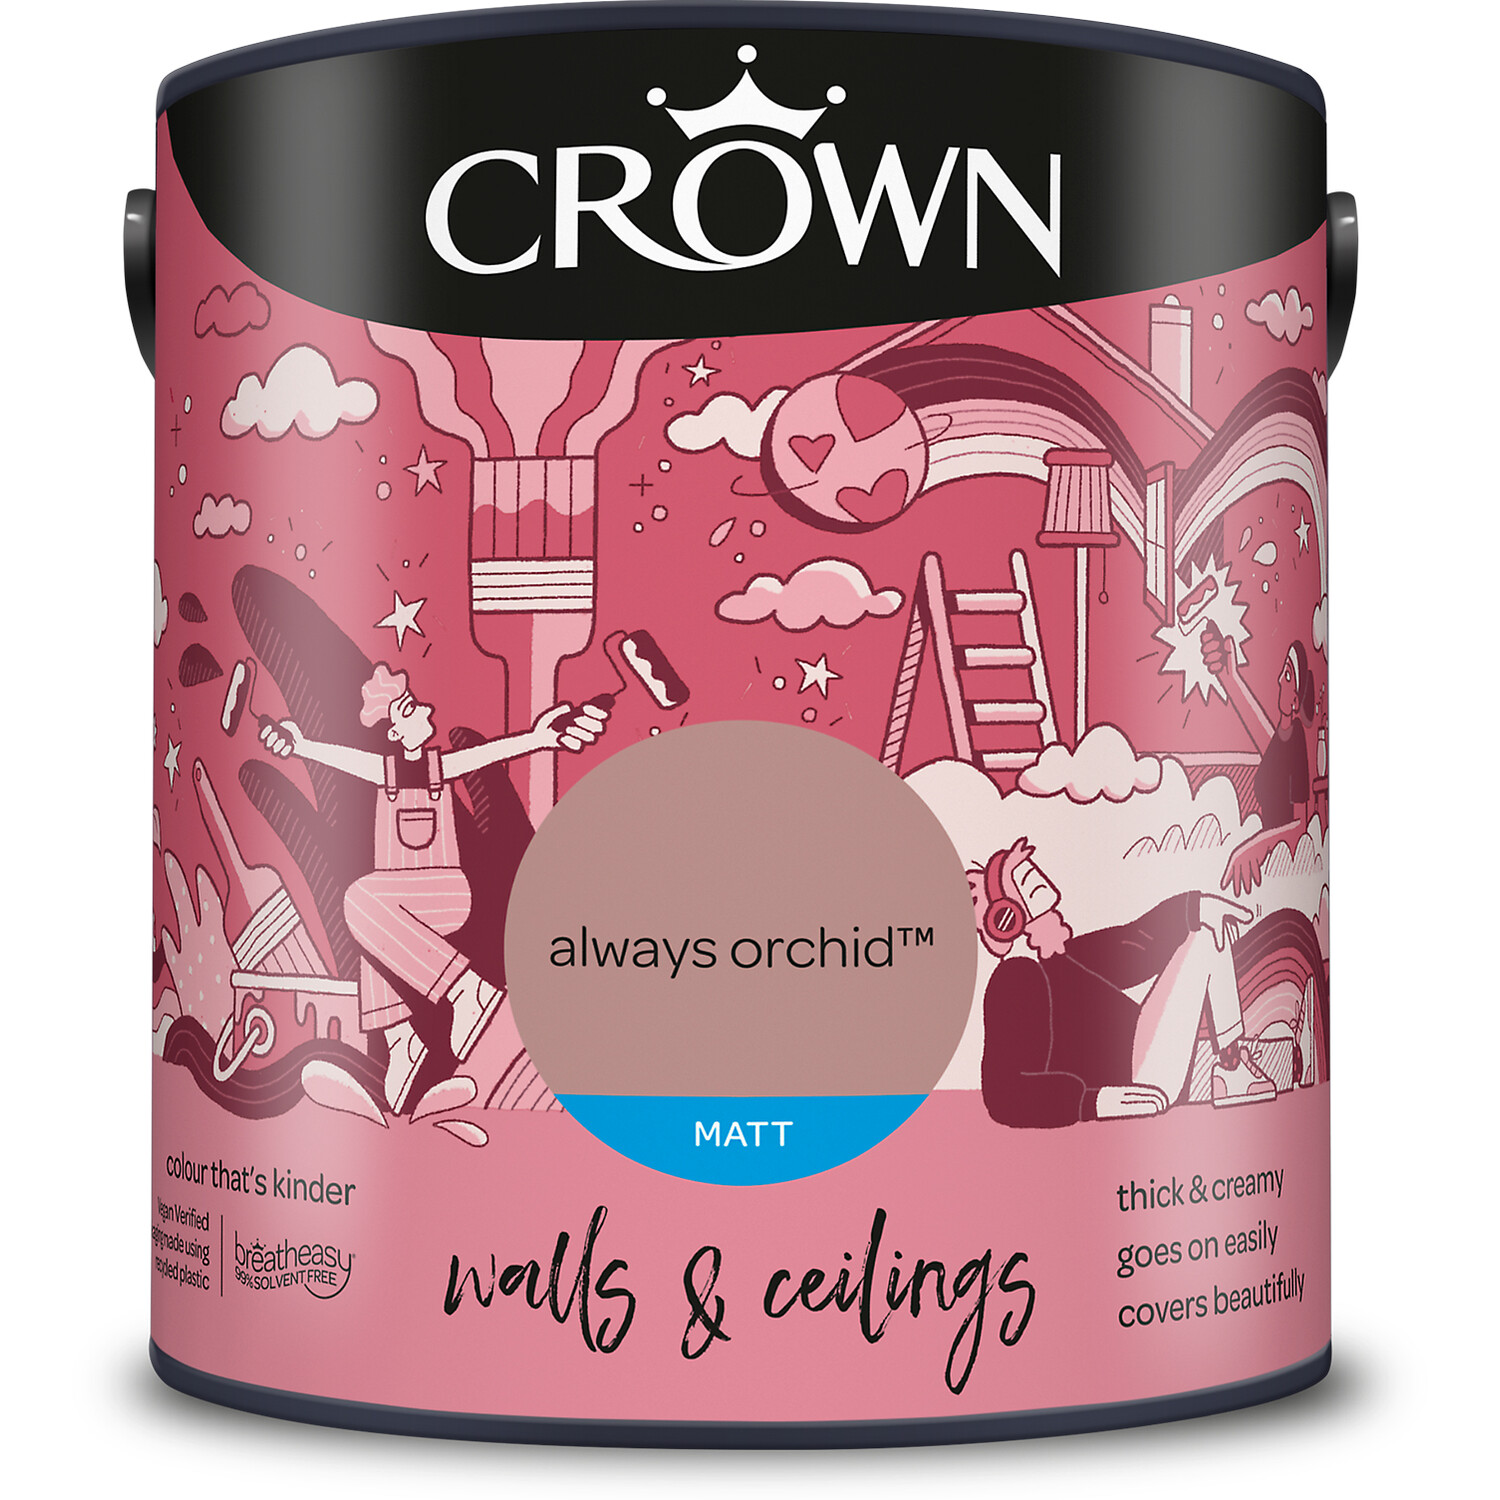 Crown Walls and Ceilings Always Orchid Matt Emulsion Paint 2.5L Image 2